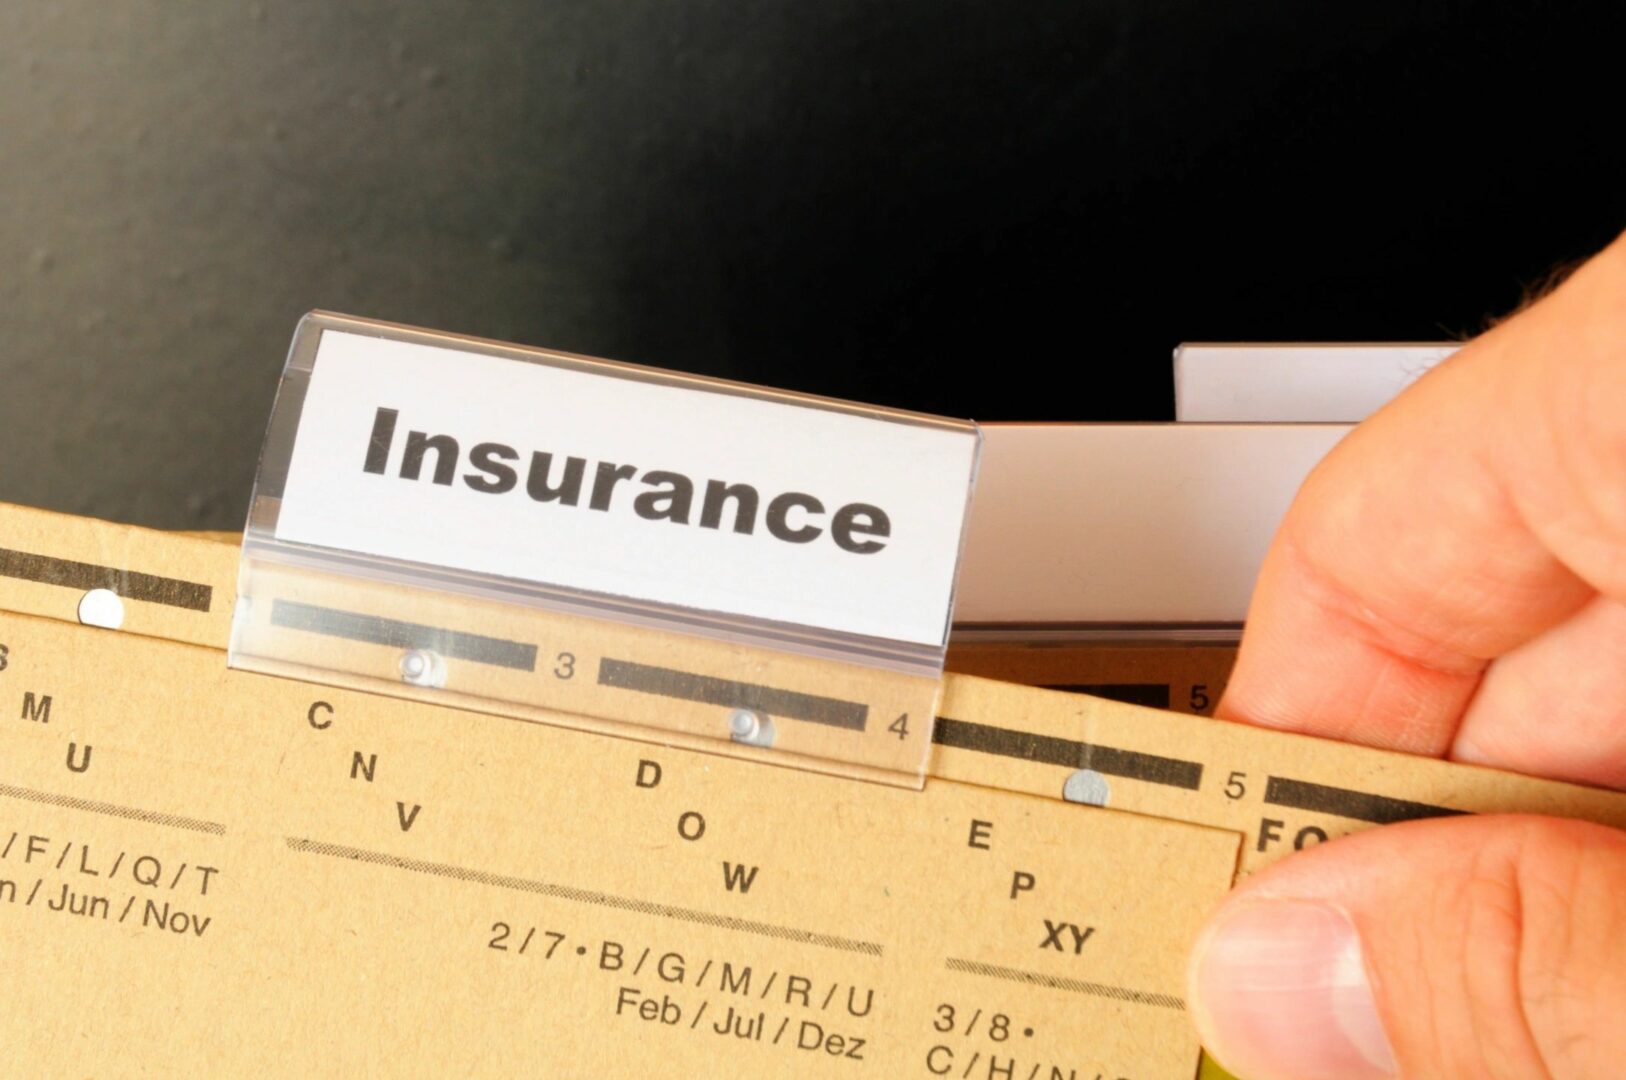 A person is holding an insurance card in their hand.